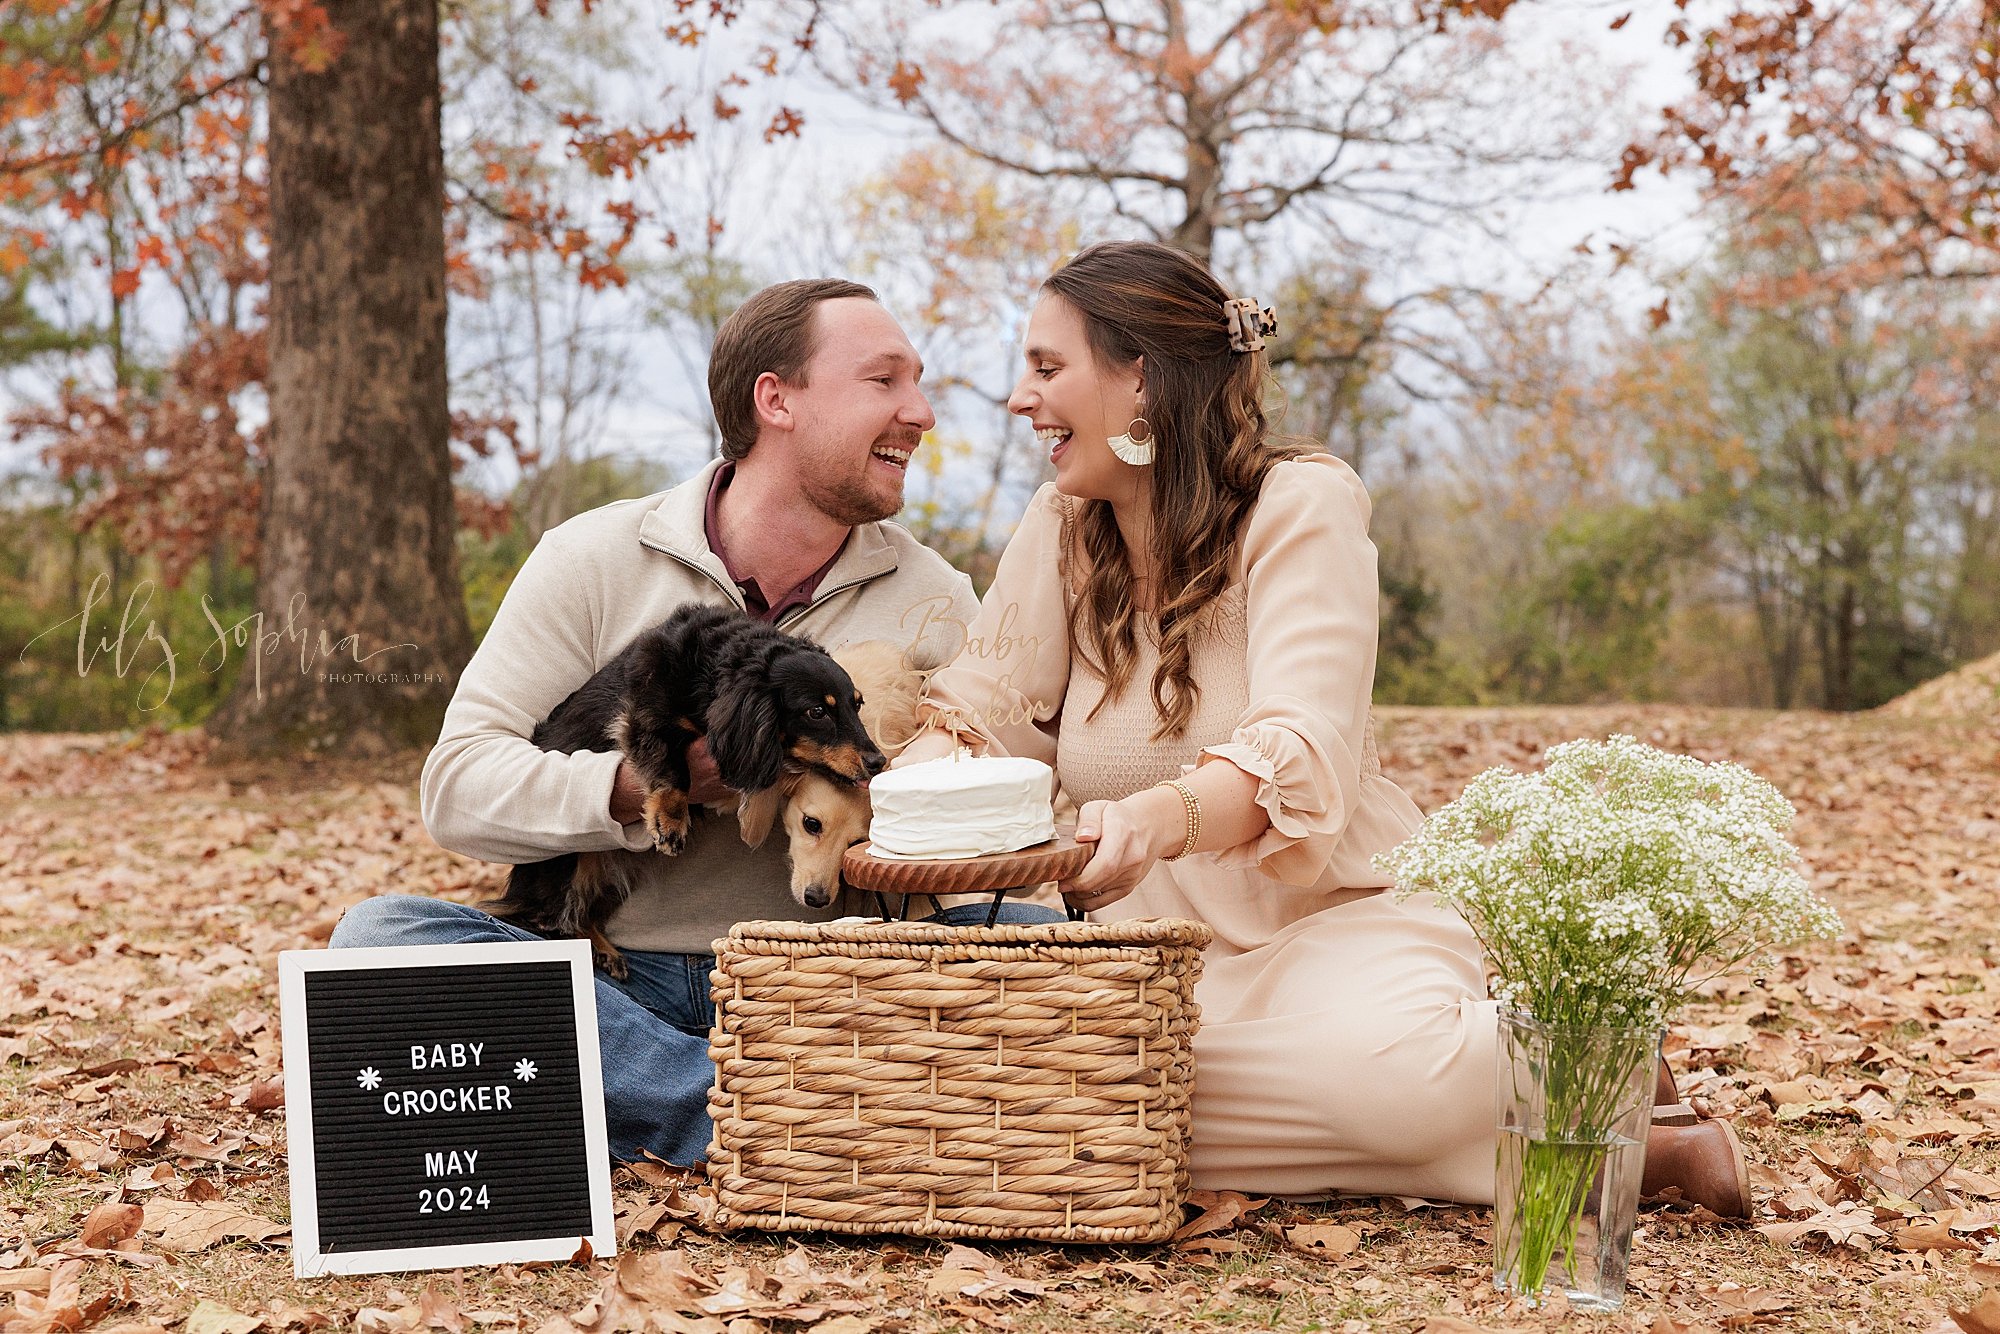 intown-atlanta-morningside-decatur-brookhaven-buckhead-outdoor-couples-maternity-fall-photoshoot-daschunds-doxies-gender-reveal_6184.jpg